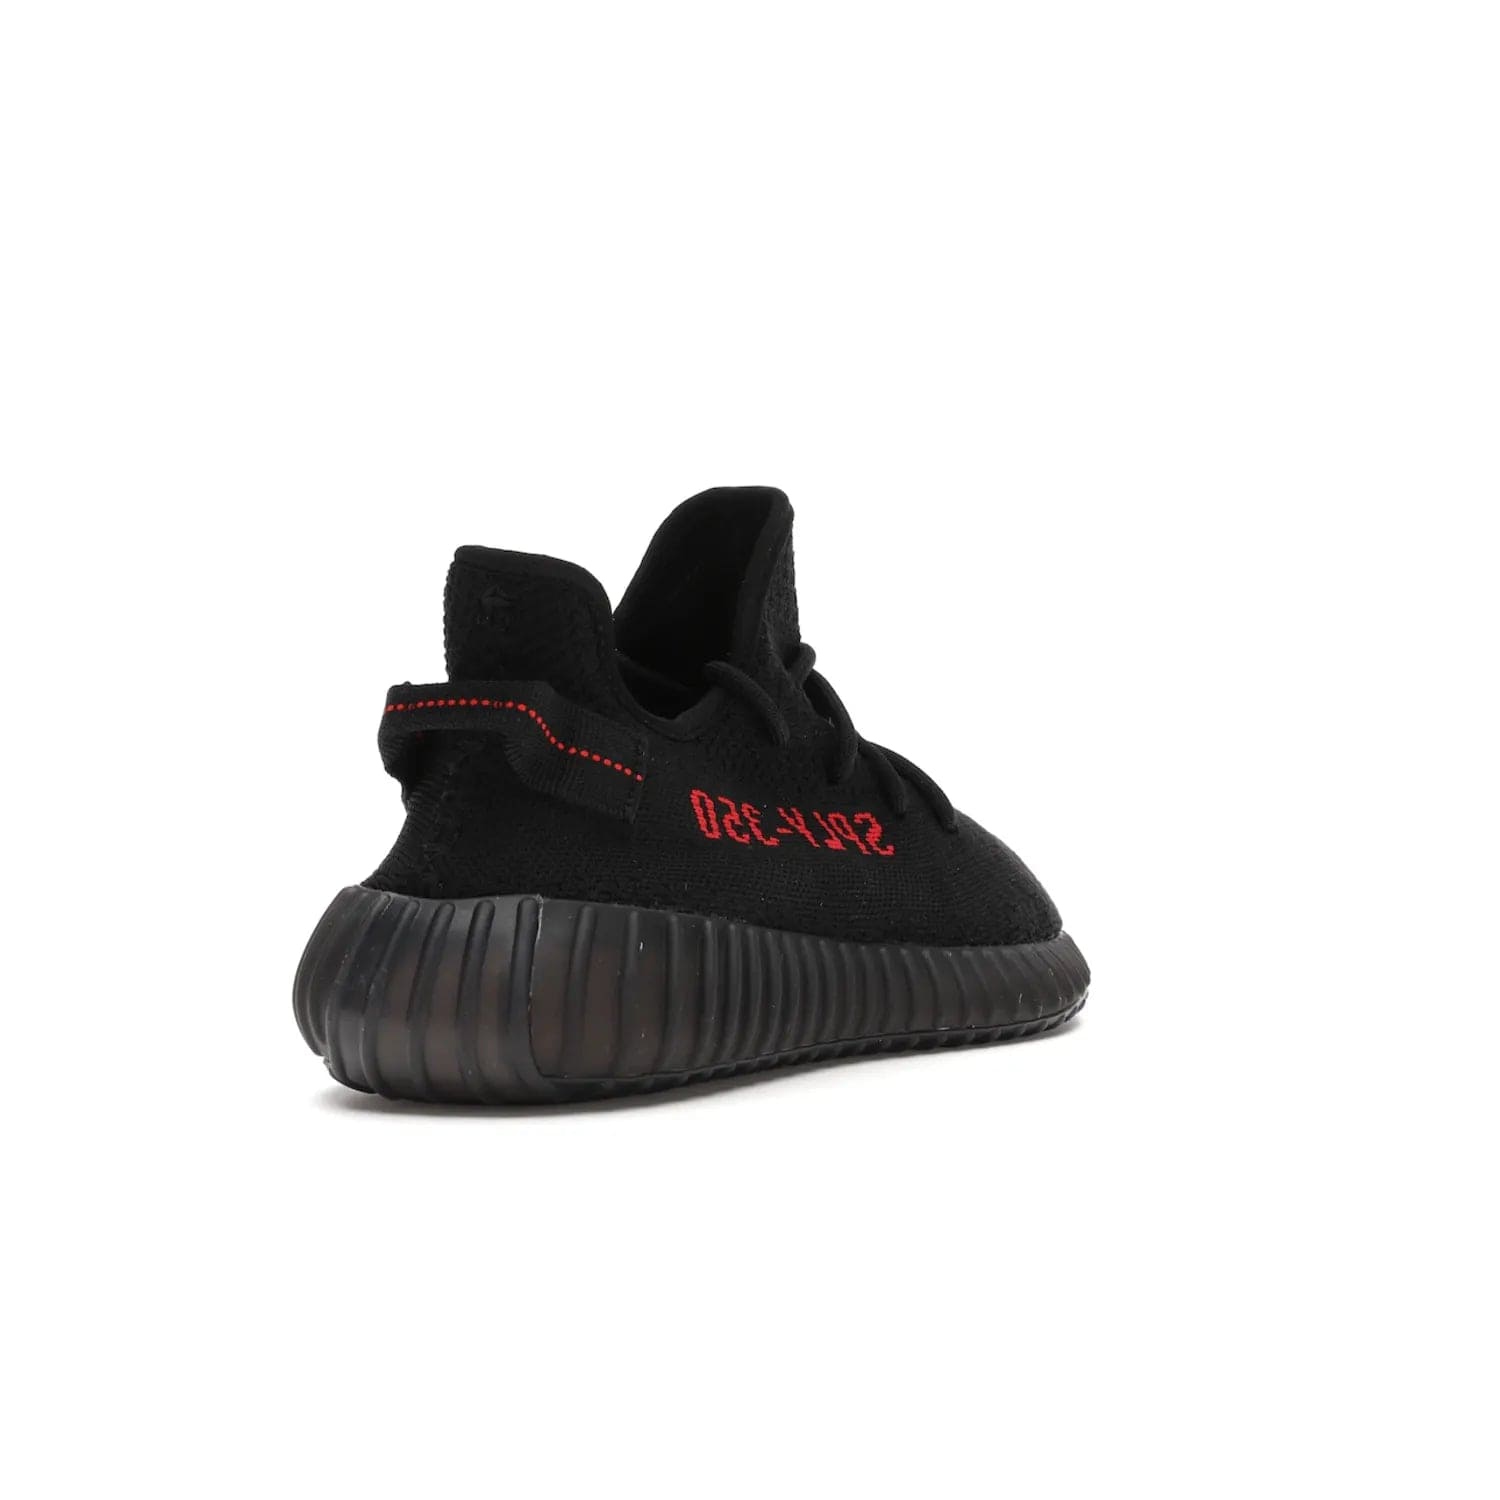 adidas Yeezy Boost 350 V2 Black Red (2017/2020) - Image 31 - Only at www.BallersClubKickz.com - Adidas Yeezy Boost 350 V2 Black Red: a classic colorway featuring black Primeknit upper, BOOST cushioning system, and iconic "SPLY-350" text. Released in 2017 for a retail price of $220.